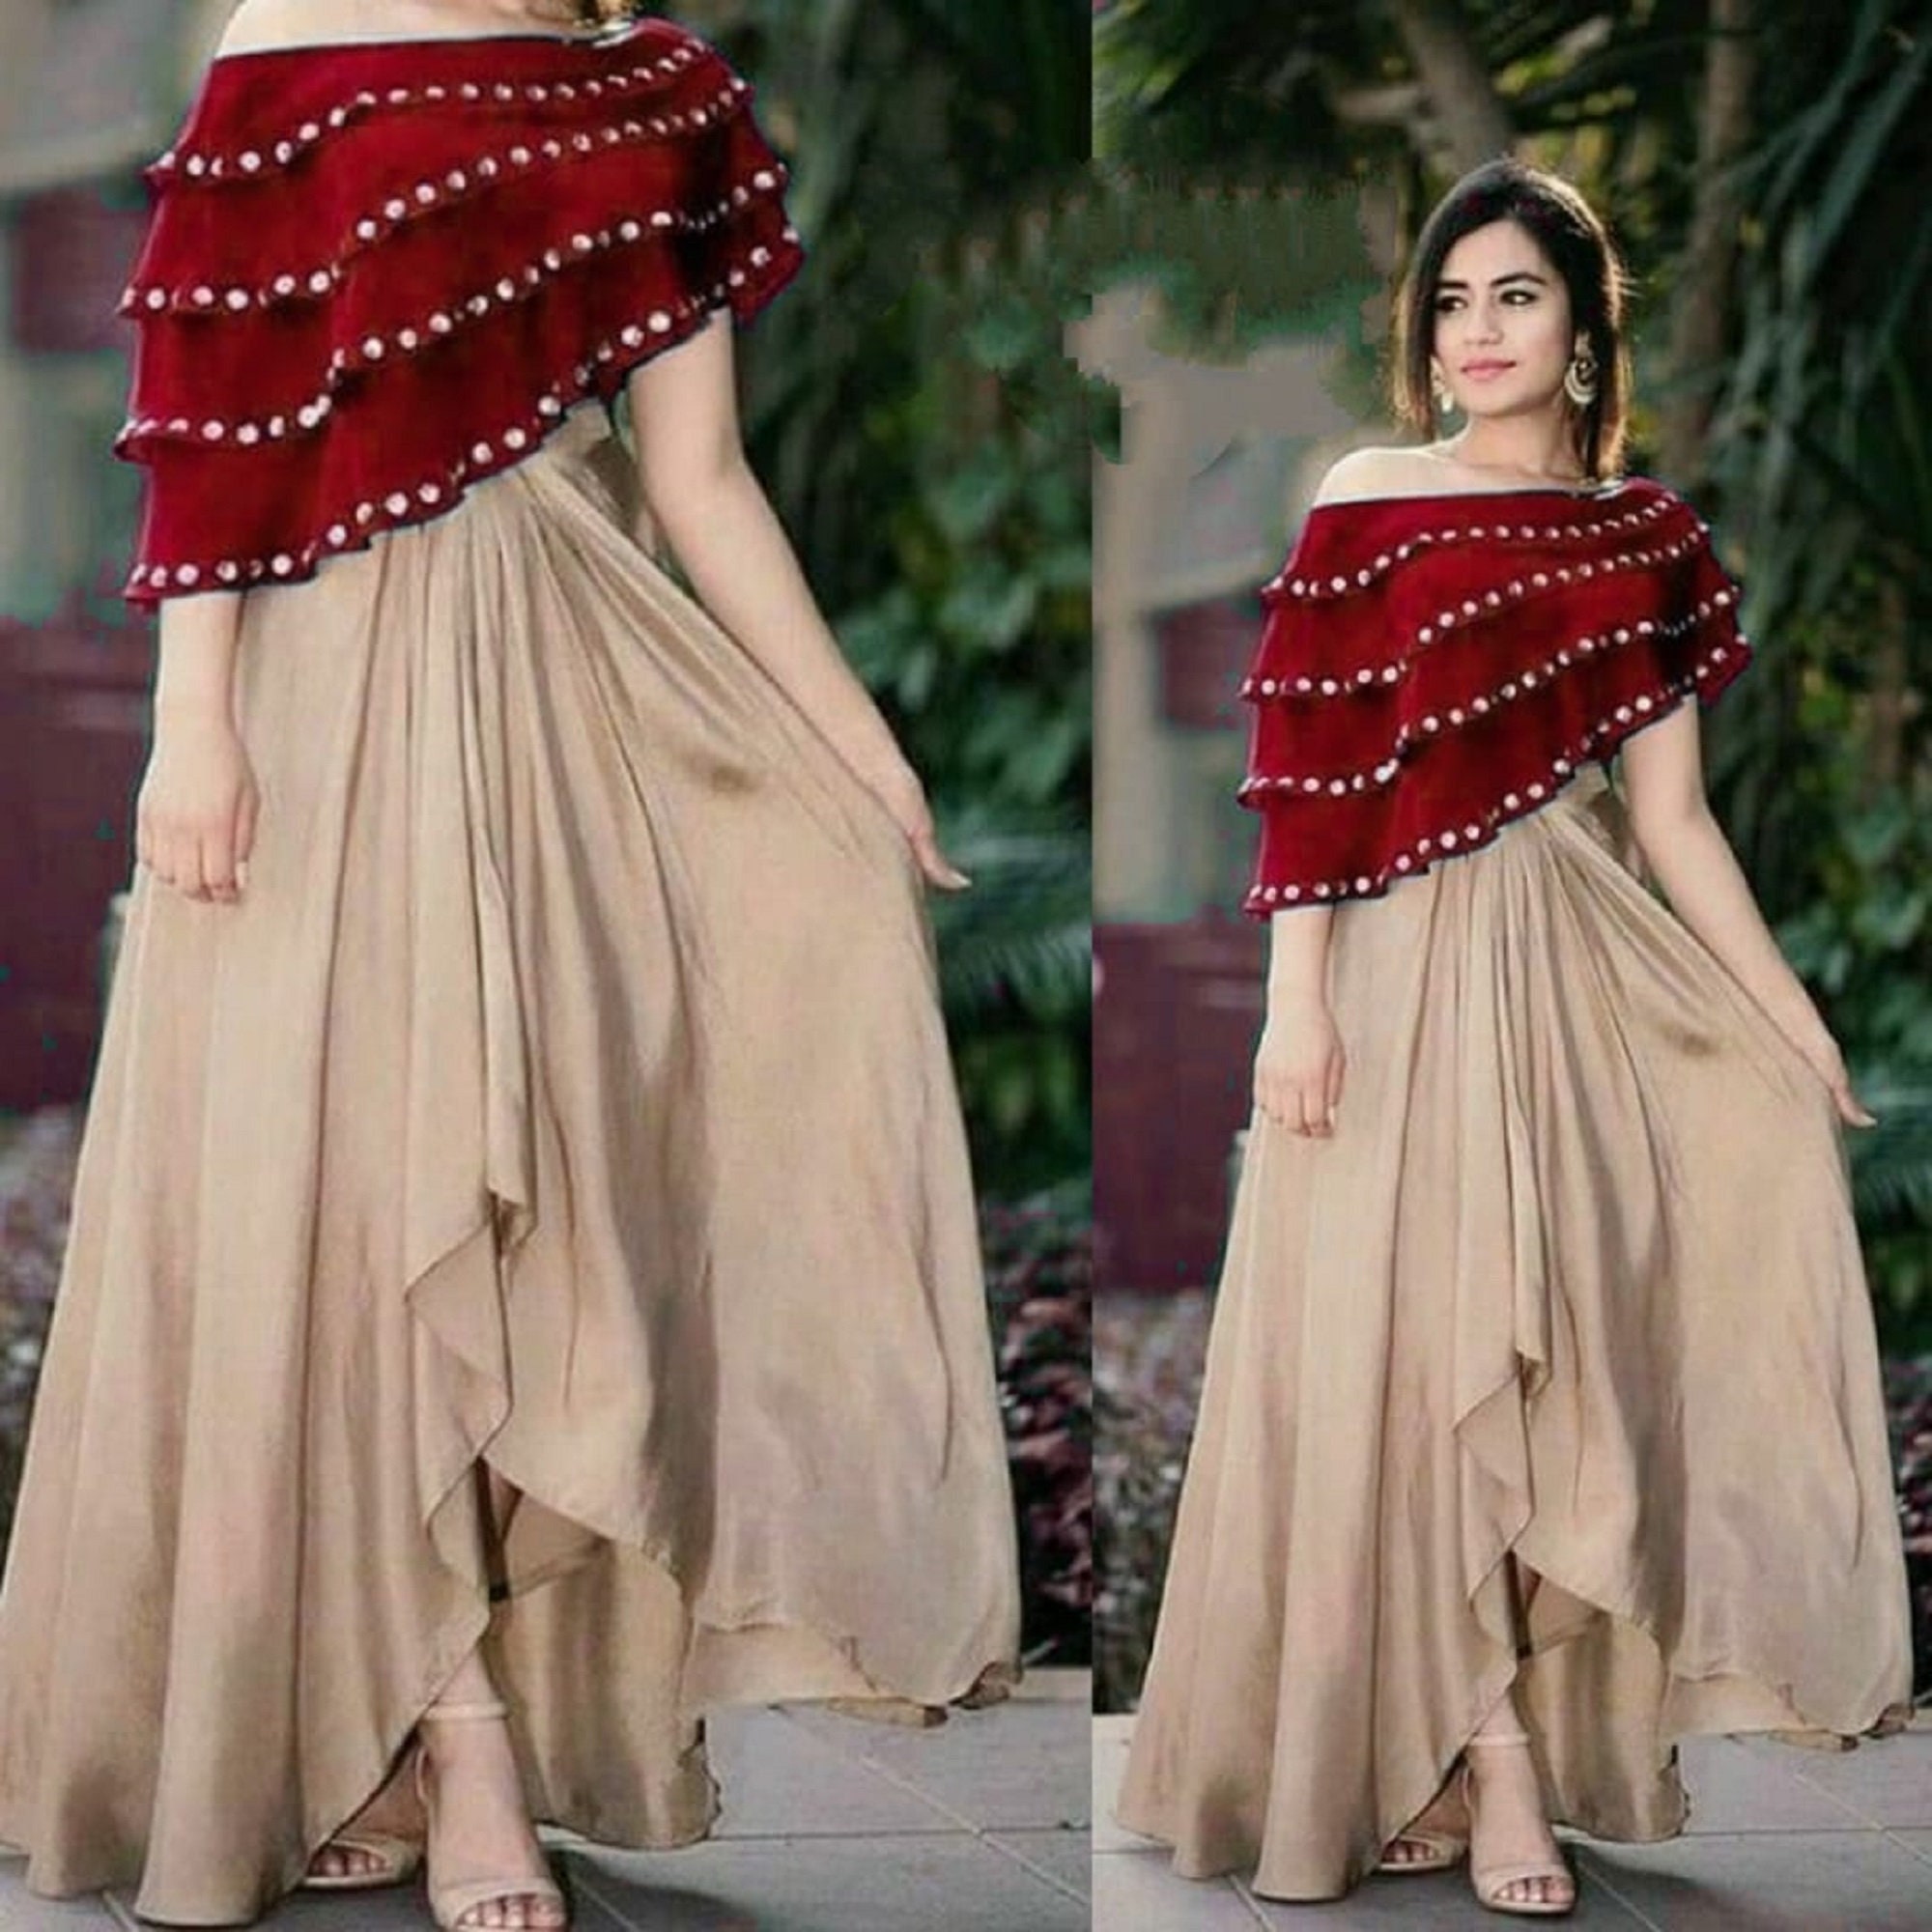 Women's Indo-Western Dress For Summer Cocktail Parties - Ethnic Race